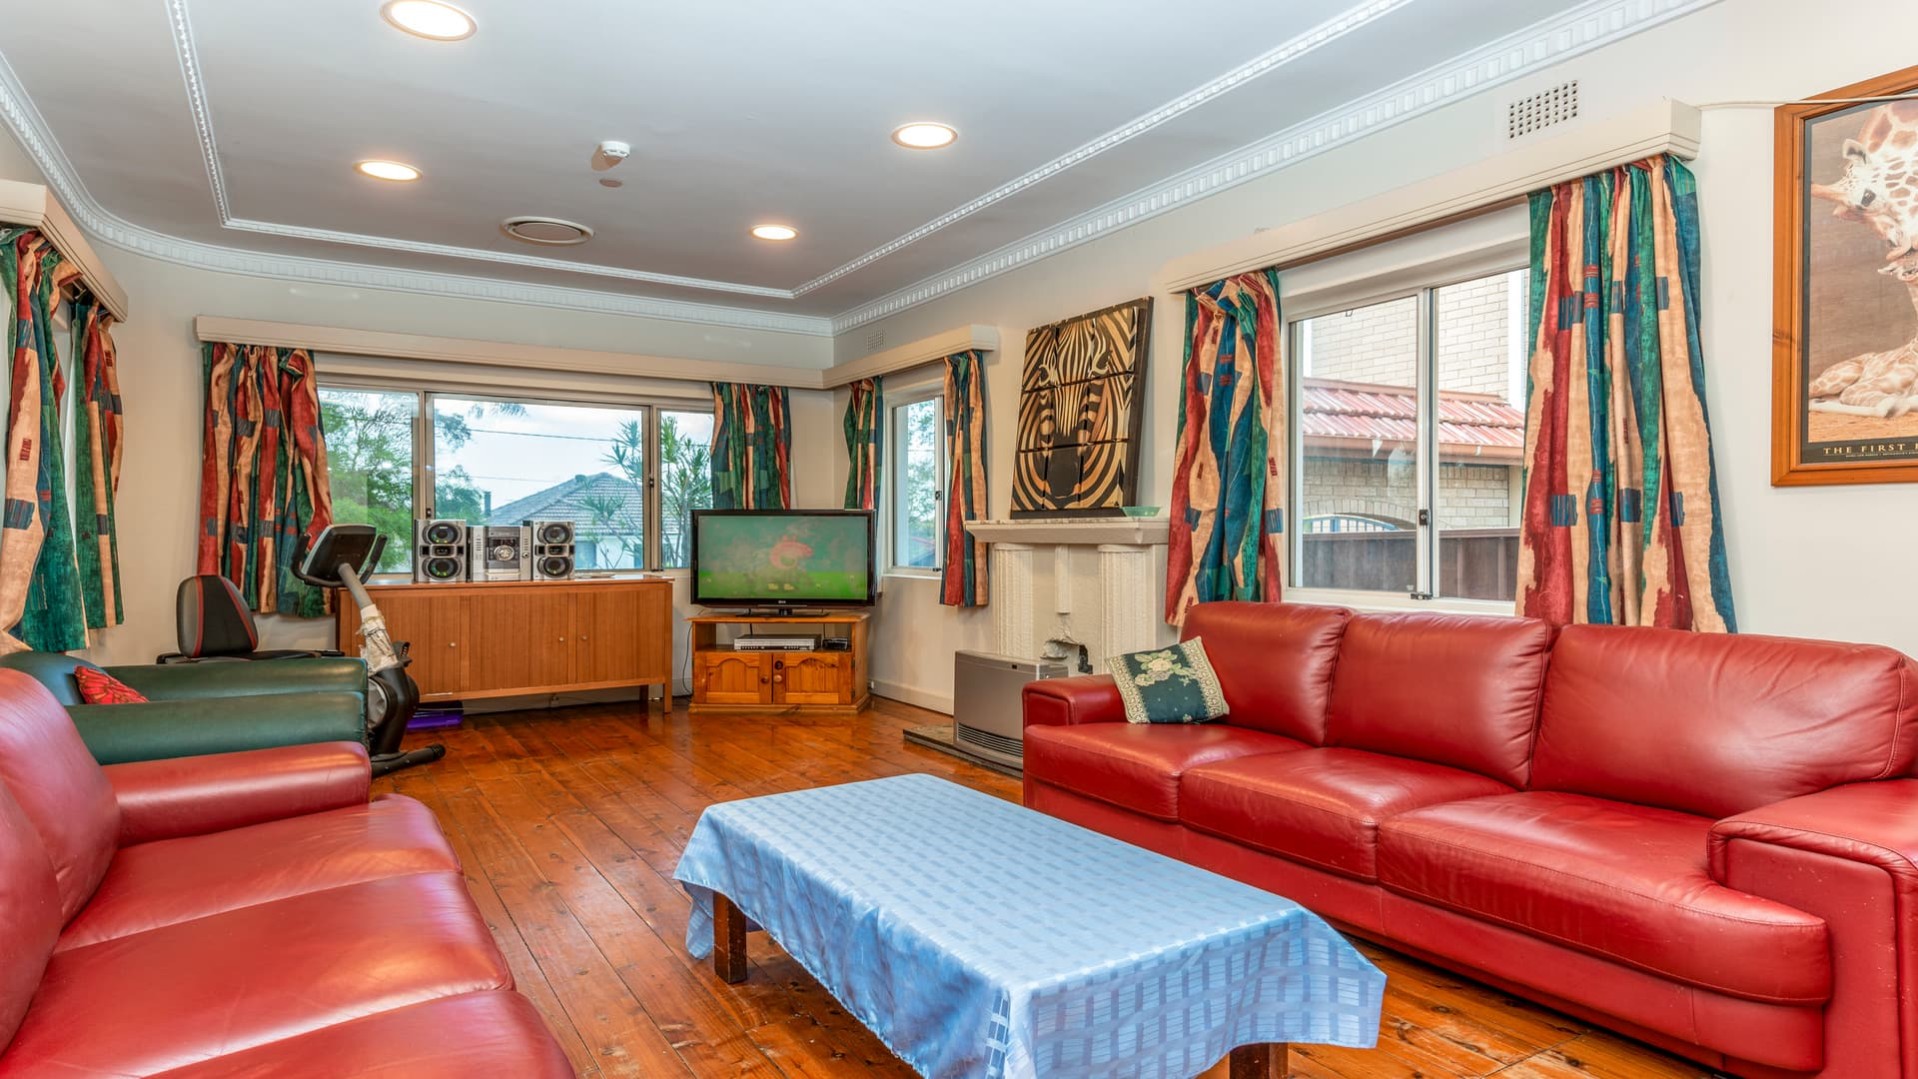 Spacious lounge area with red leather couches and armchairs. Large windows on both walls featured in the photos.  